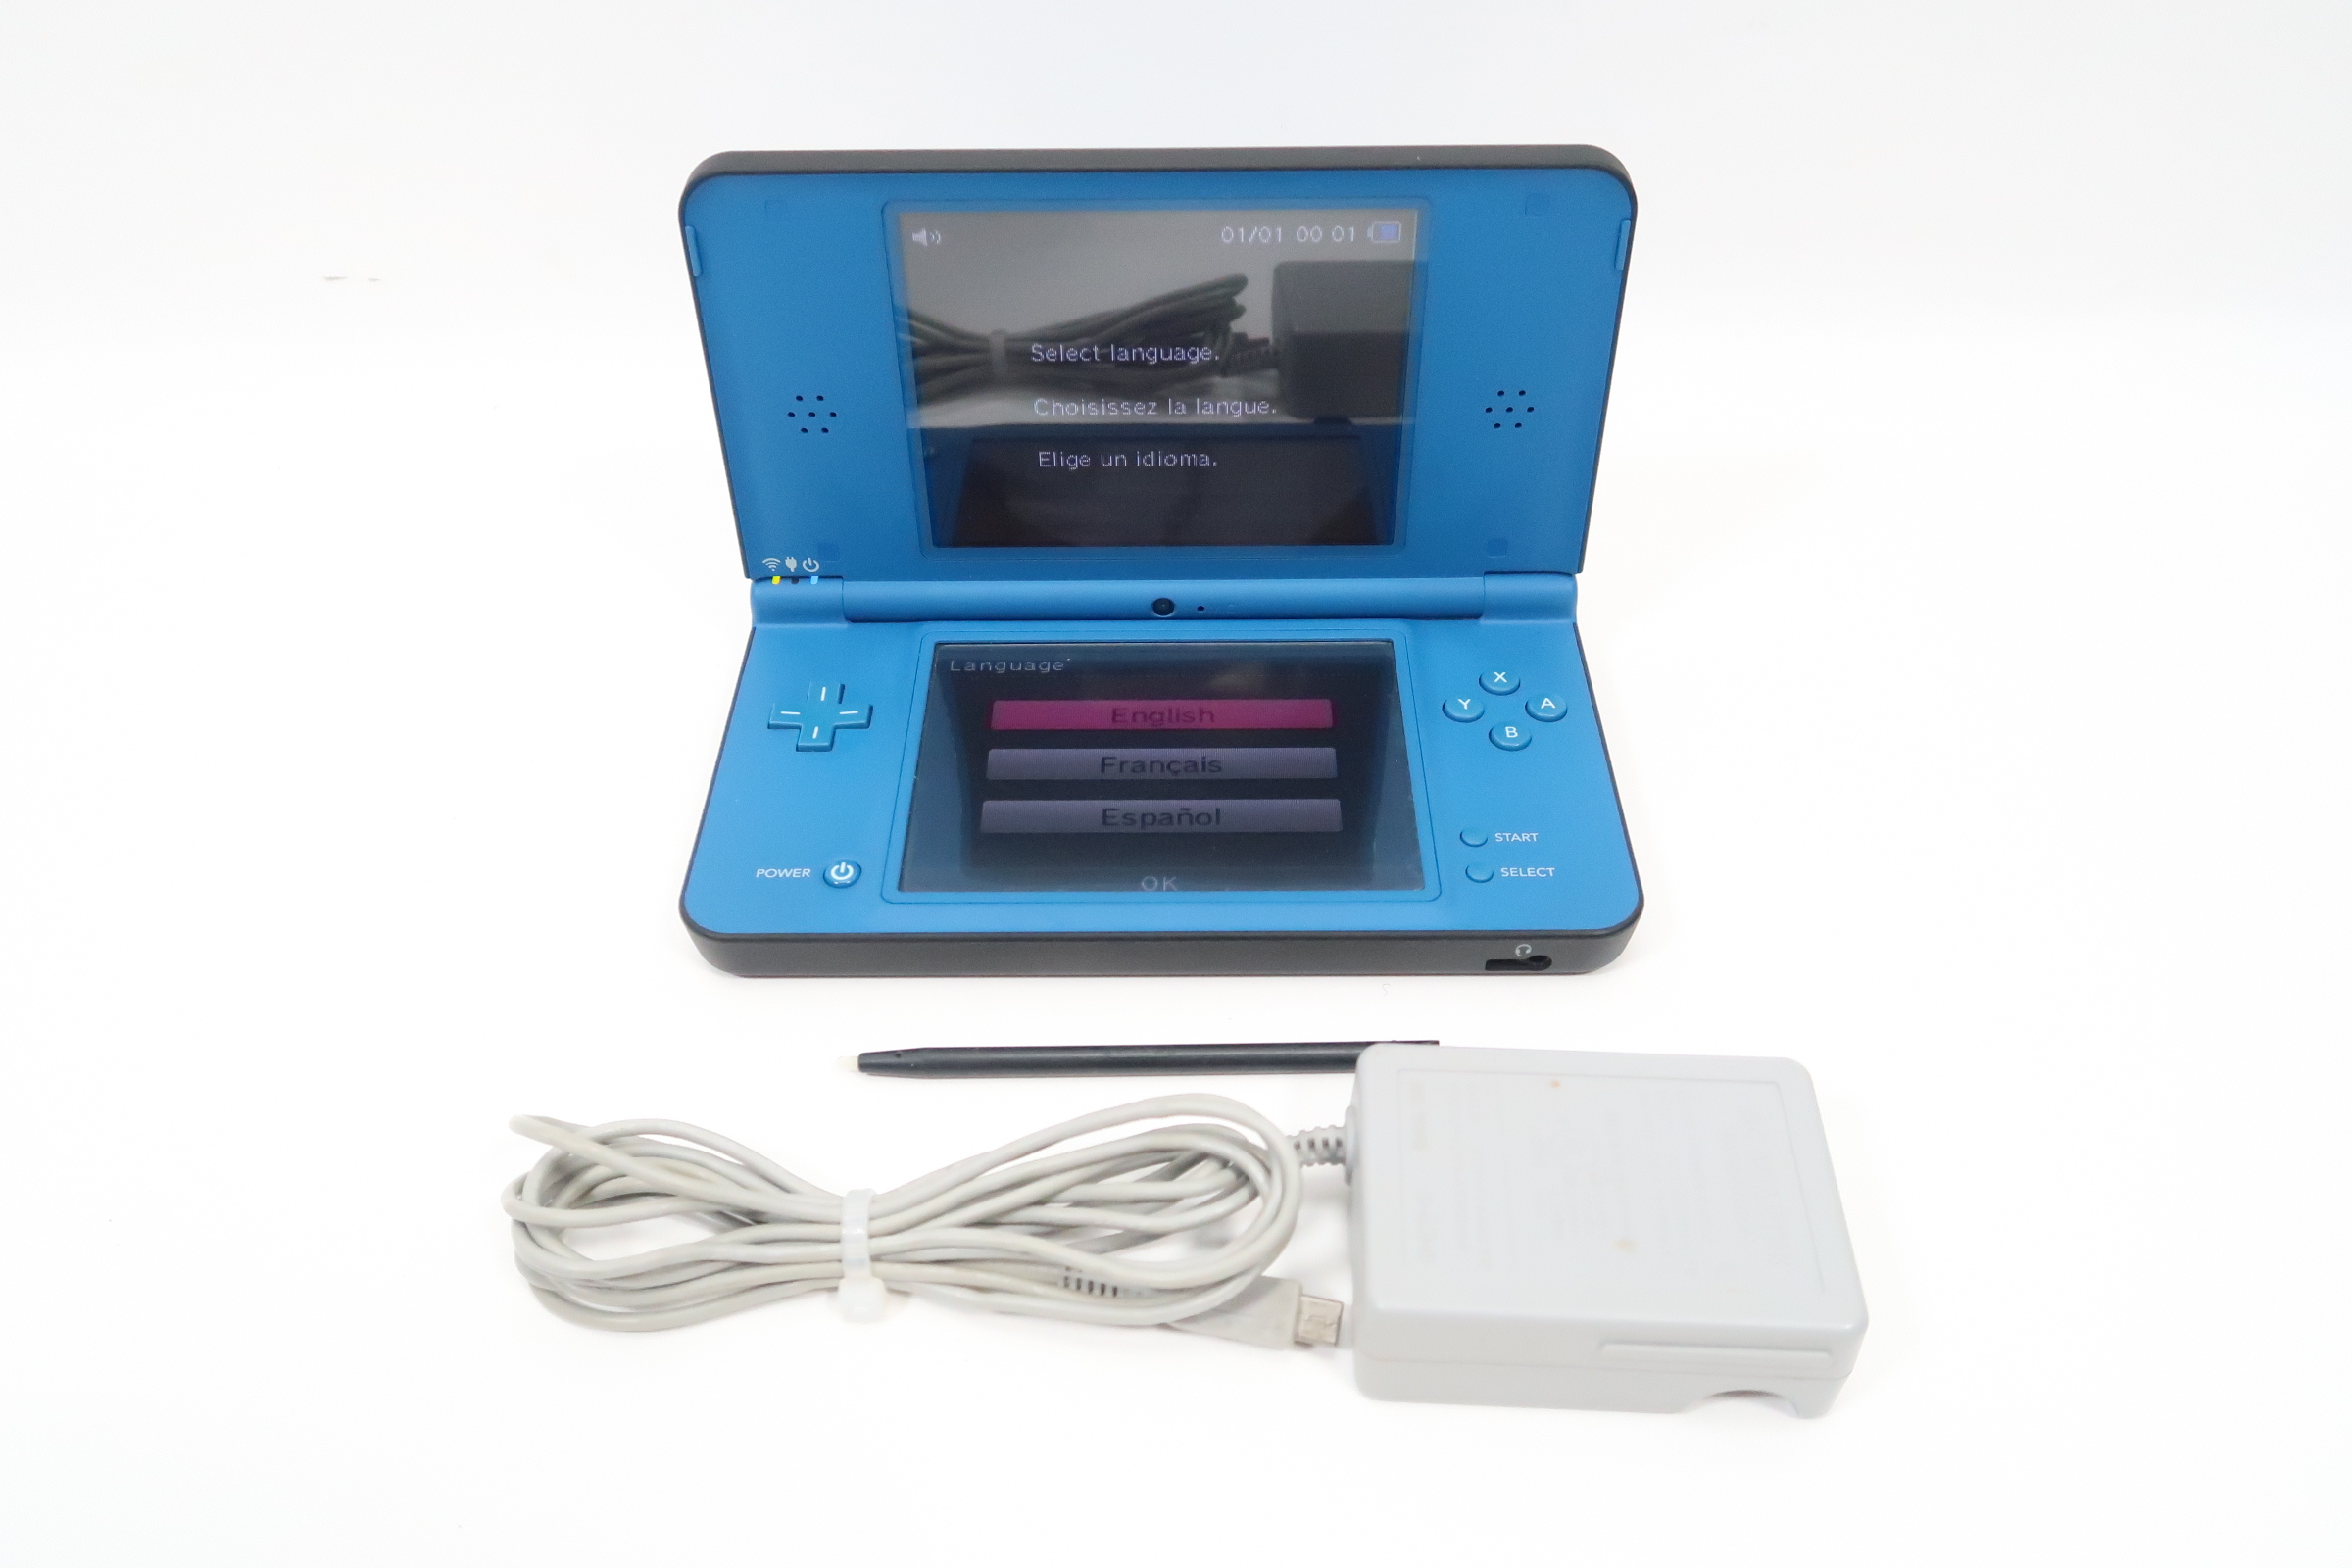 Used Nintendo DS/DSi Consoles for Sale